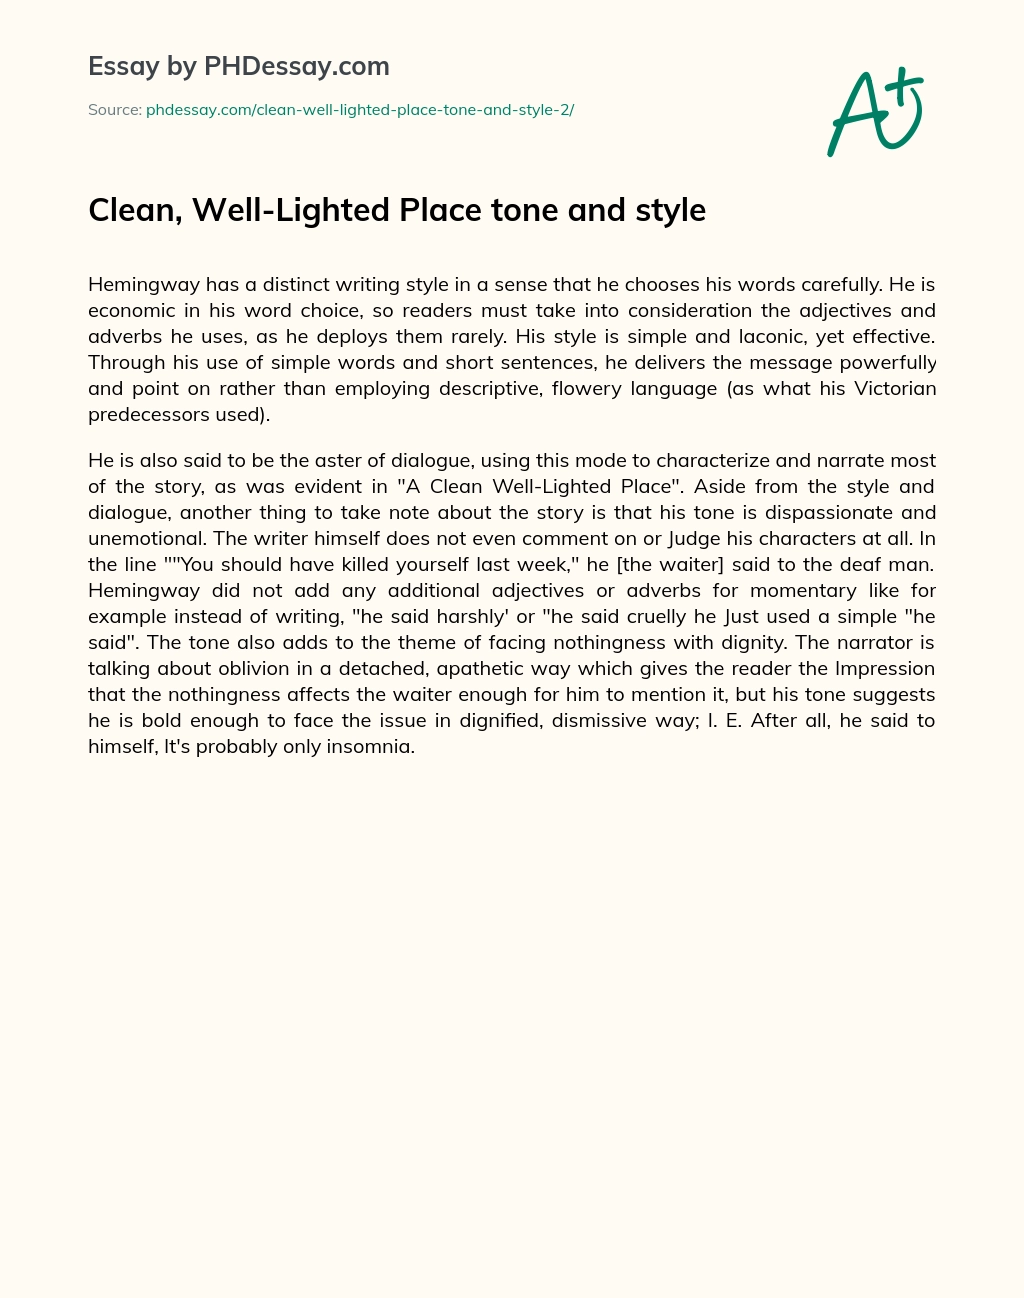 Clean, Well-Lighted Place tone and style essay